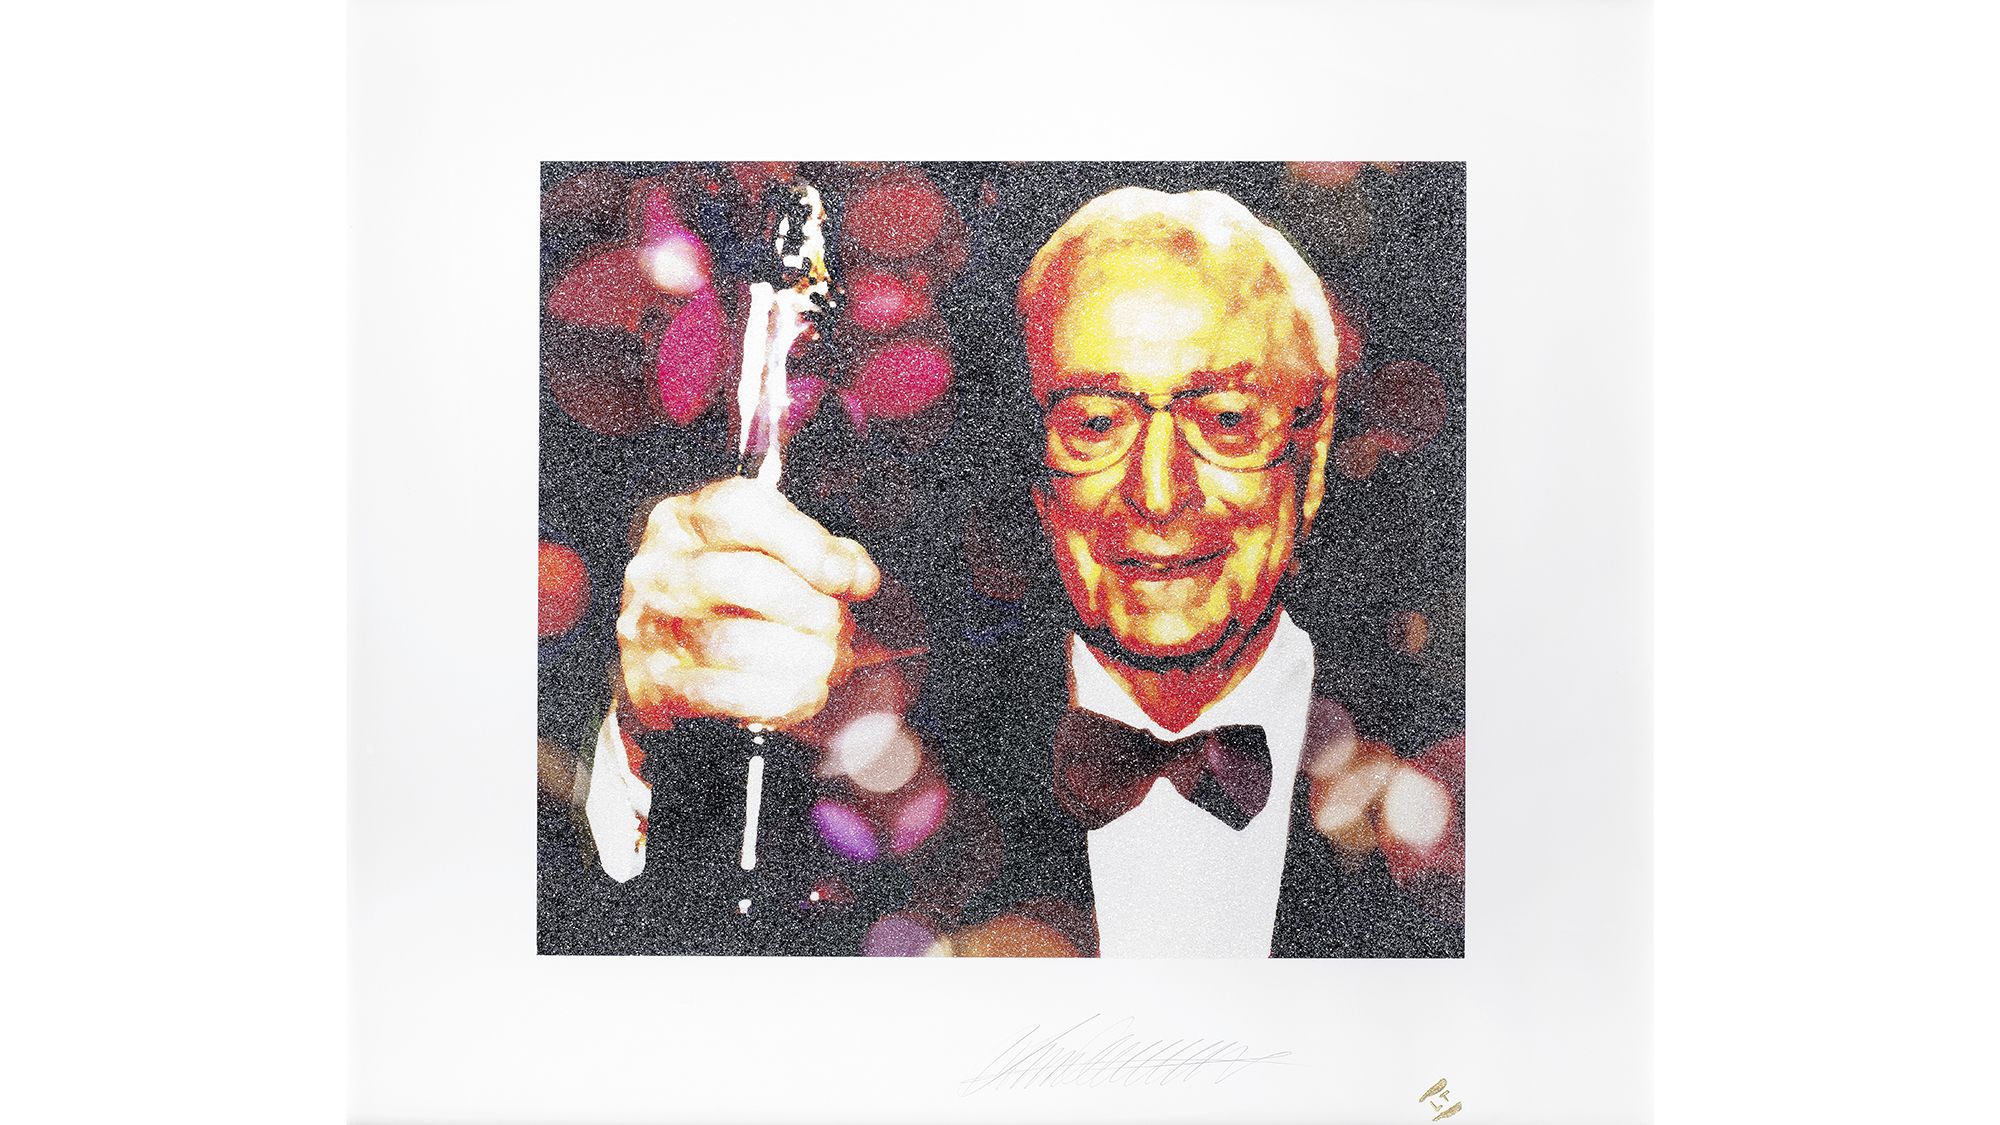 Michael Caine is selling his art and film memorabilia – and even his  glasses